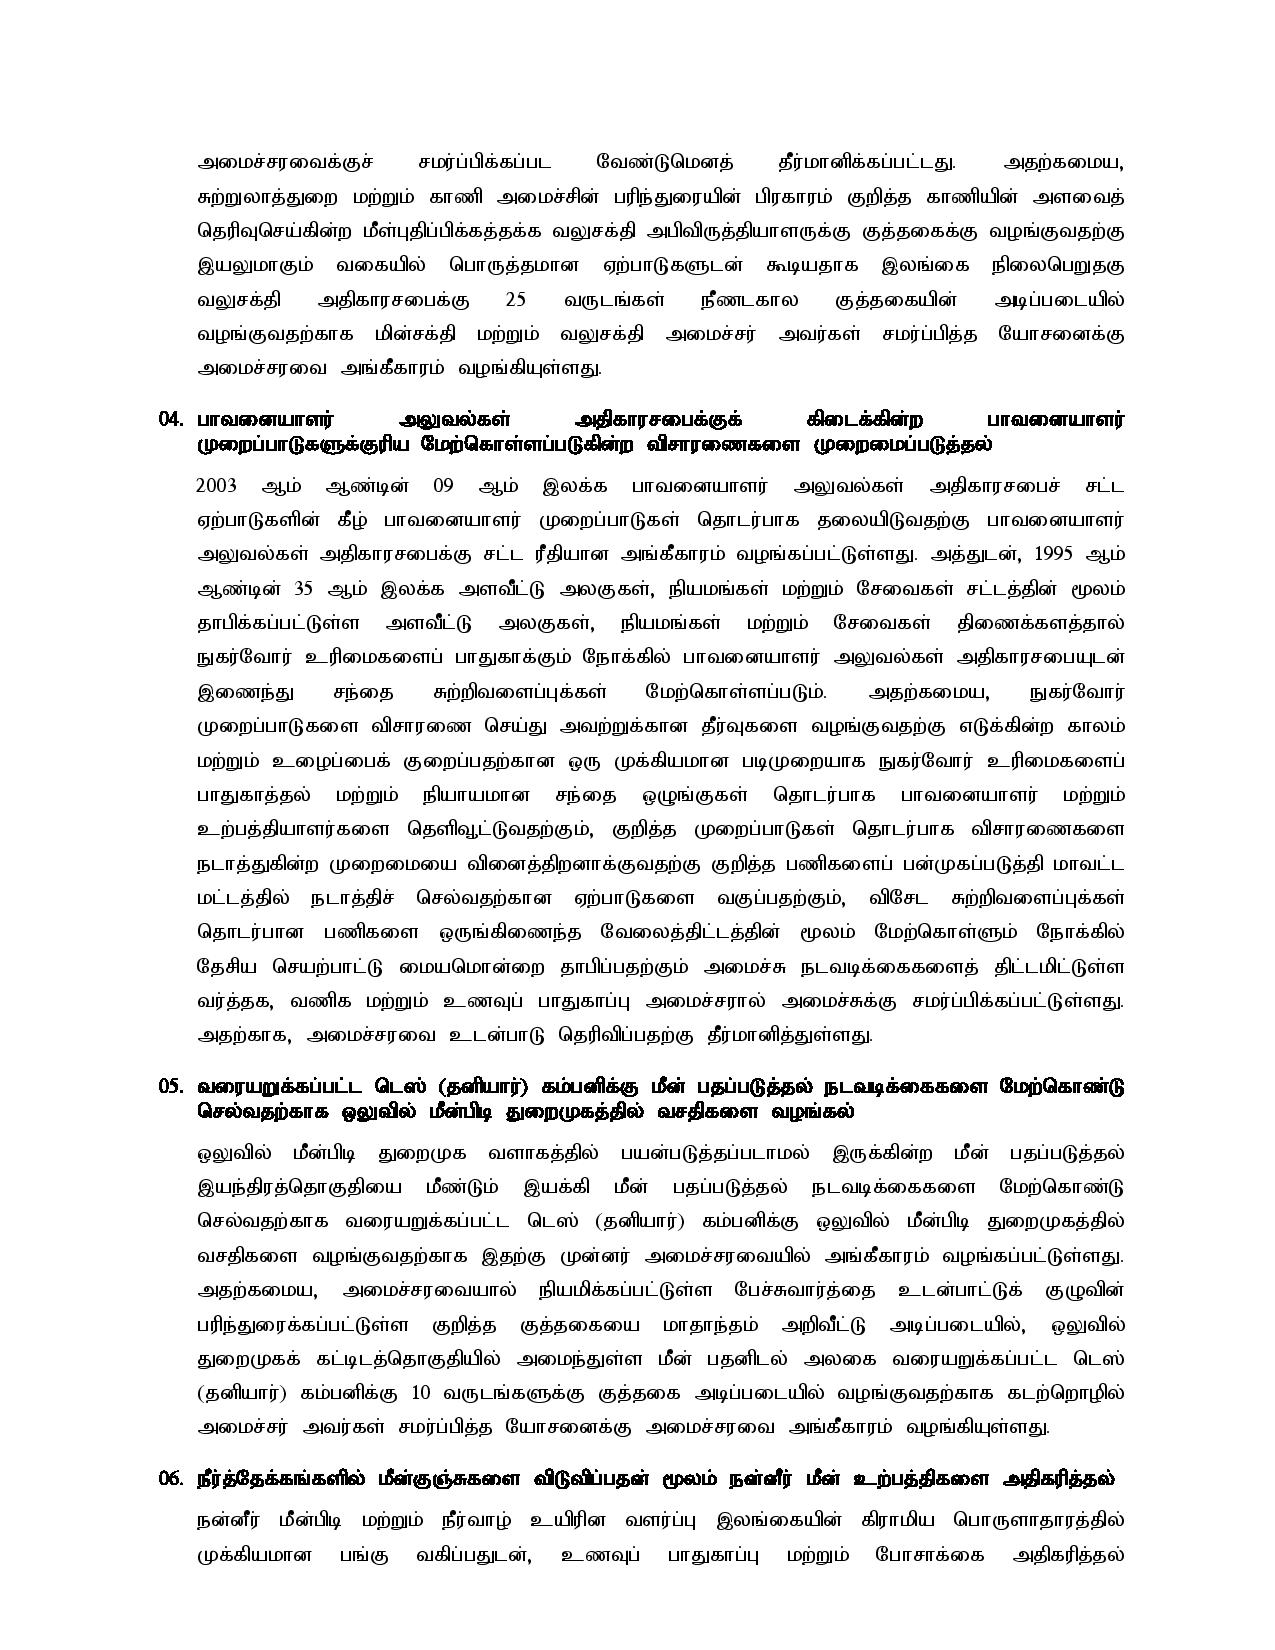 Cabinet Decisions on 02.10.2023 Tamil page 002